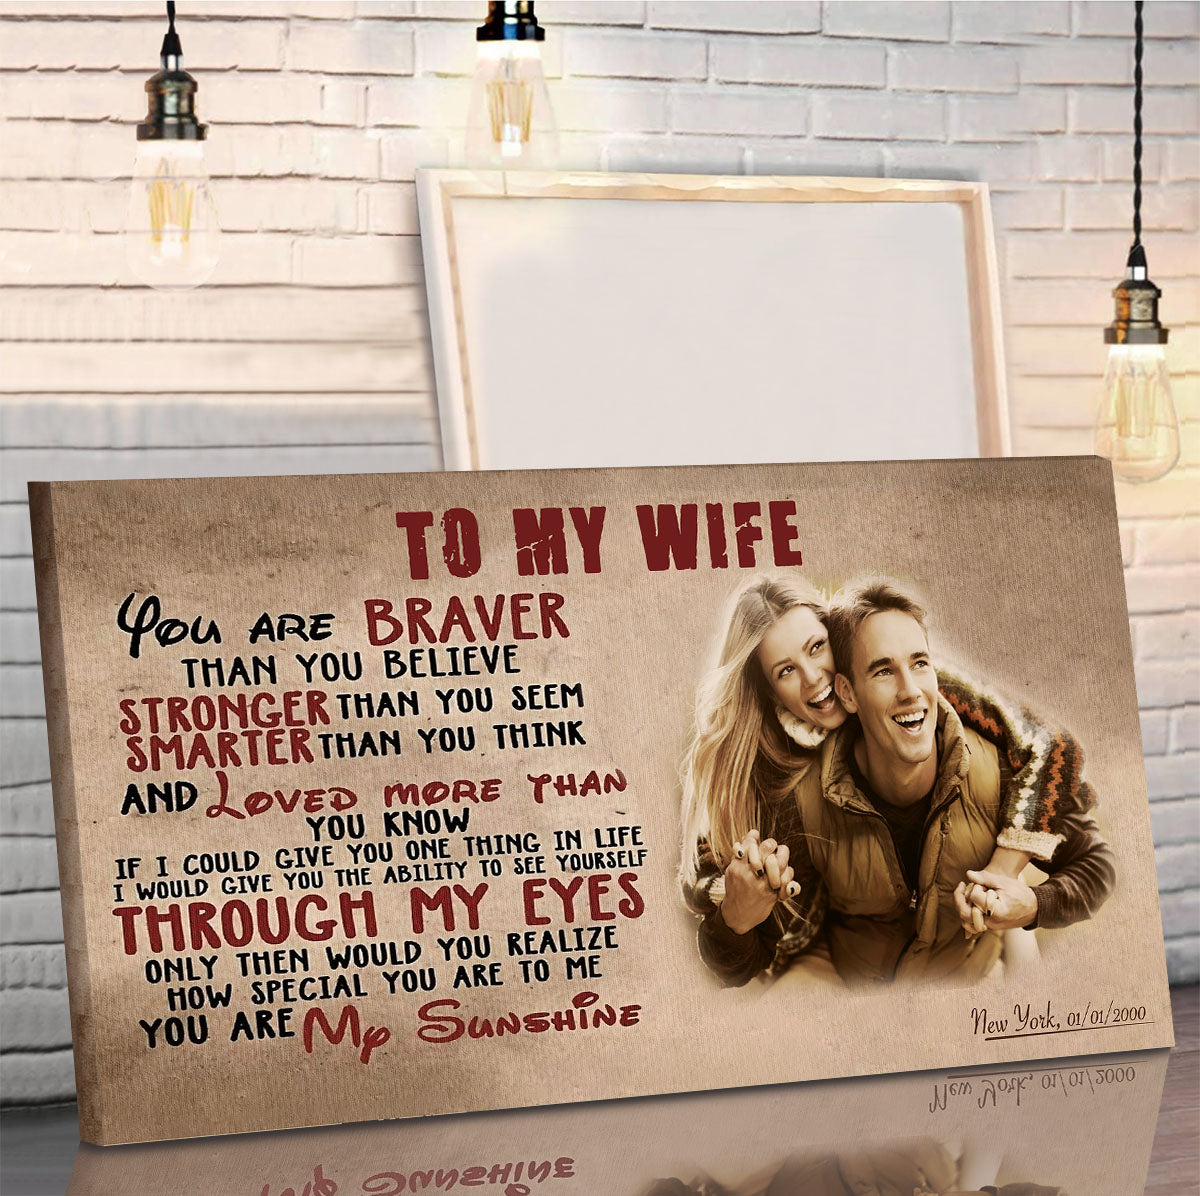 UP005 - To My Wife - Braver - Stronger - Smarter - Loved - Carl & Ellie - Up (2009 film) - Horizontal Poster - Horizontal Canvas - Carl & Ellie Poster